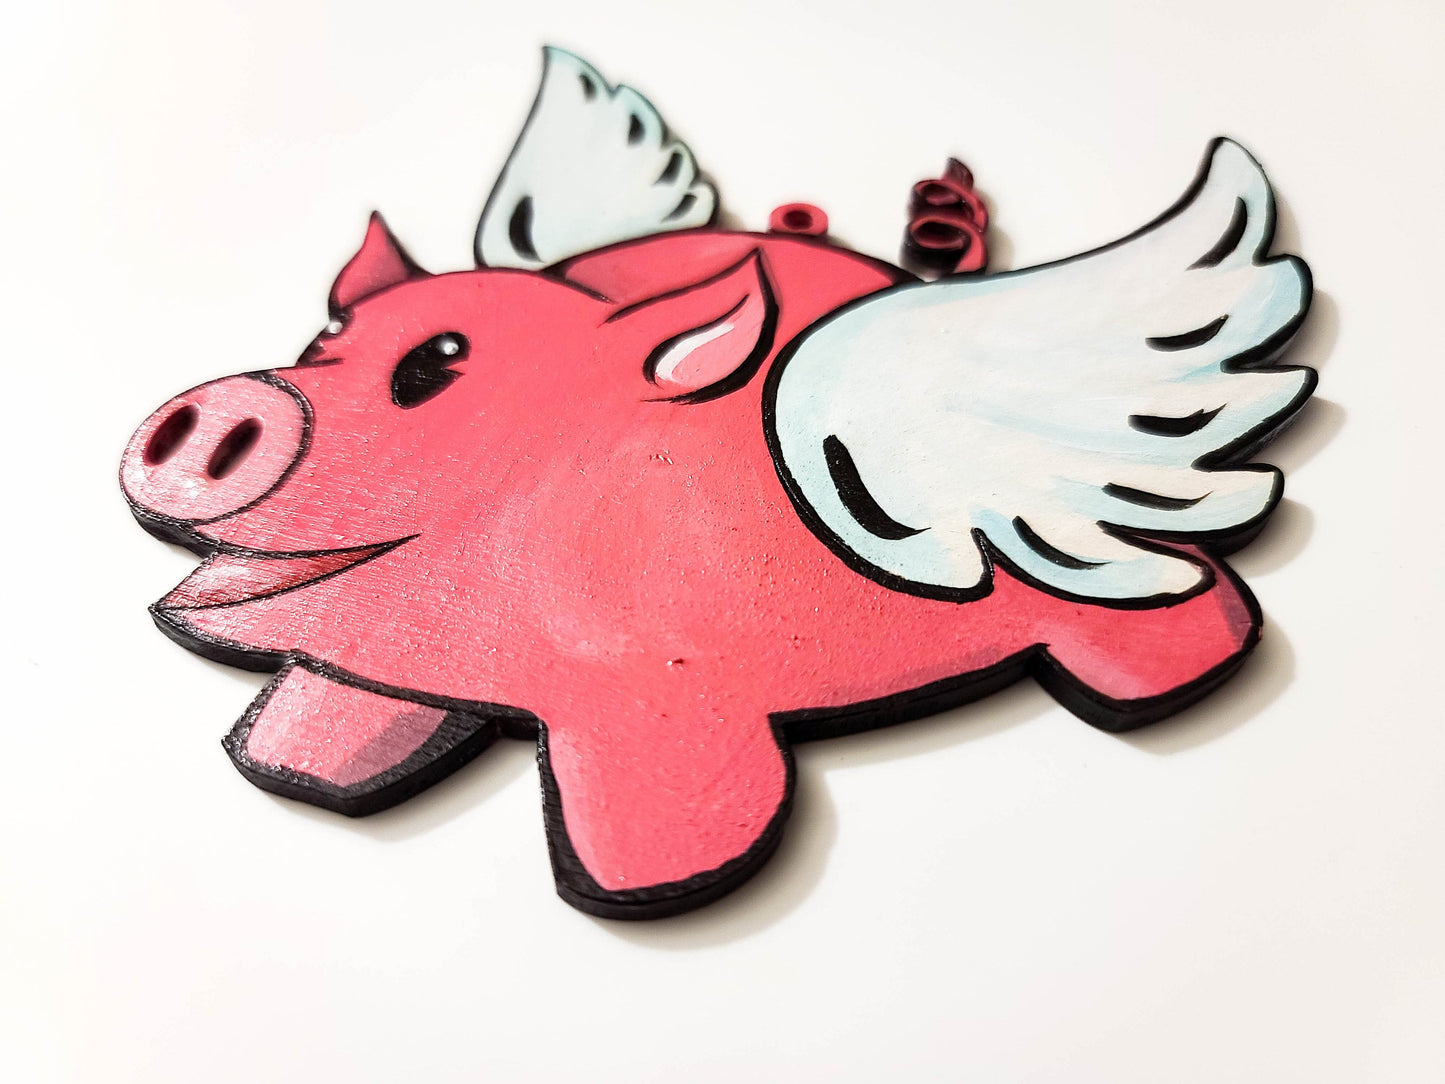 Retro Flying Pig-Hand Painted Wood Ornament-Rubberhose Style-Spooky Holiday Decor-Vintage Cartoon Style Ornament-Pig Ornament-Retro Decor